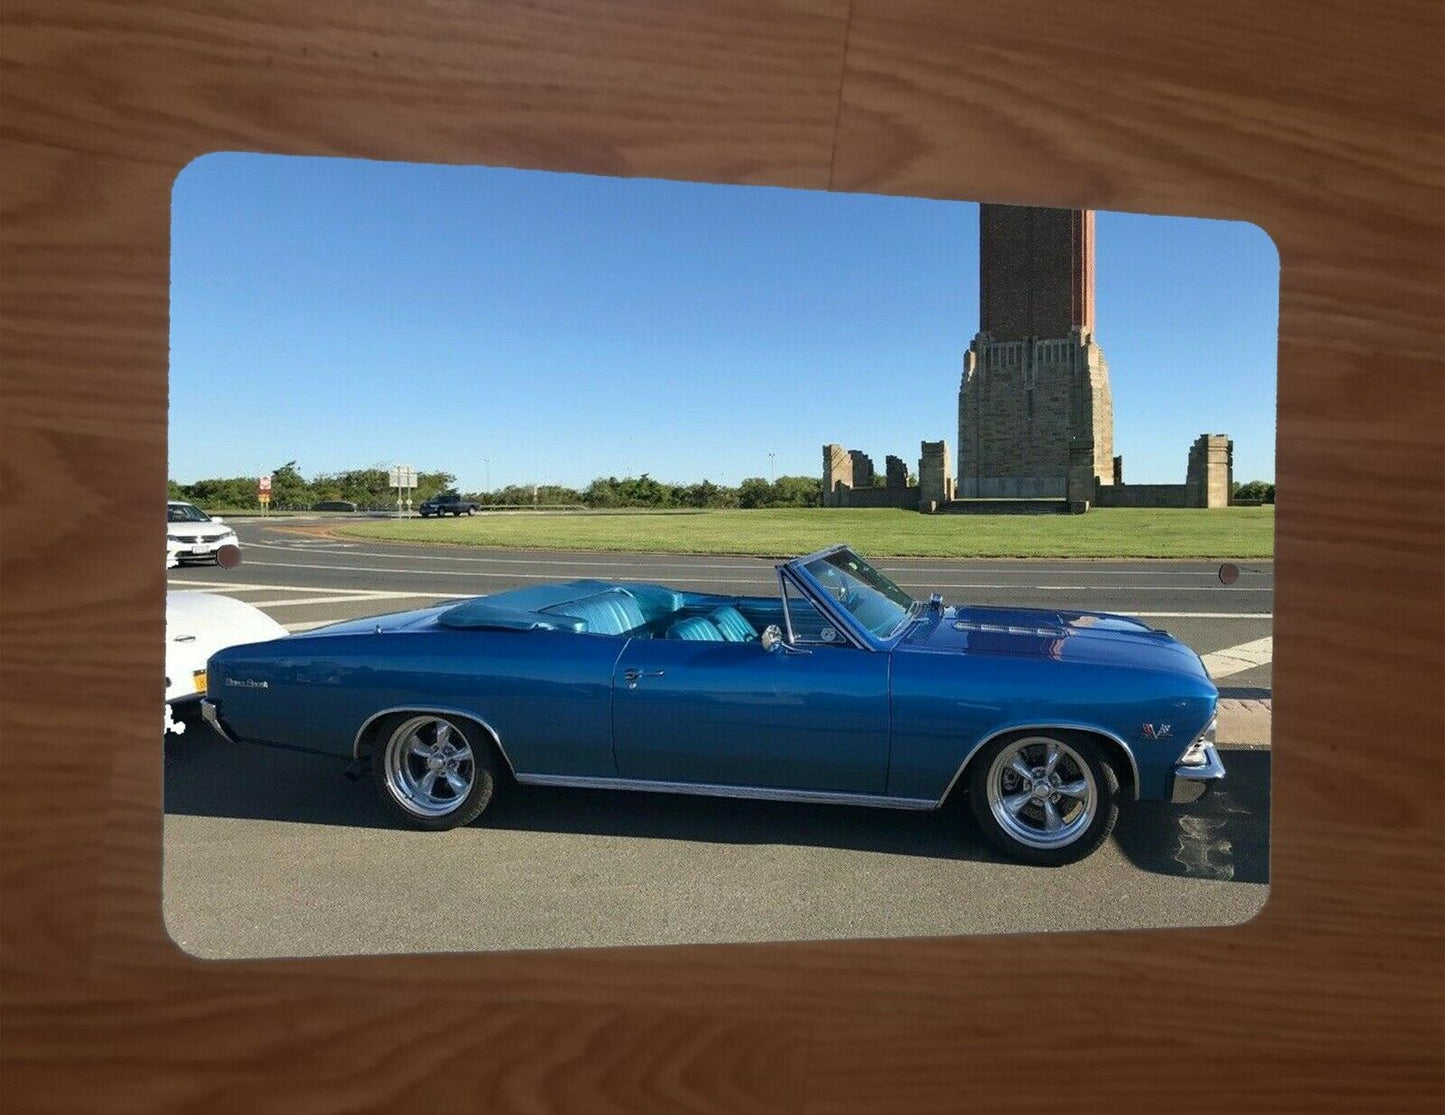 1966 Chevy chevelle ss 396 convertible car 8x12 Metal Wall Car Sign